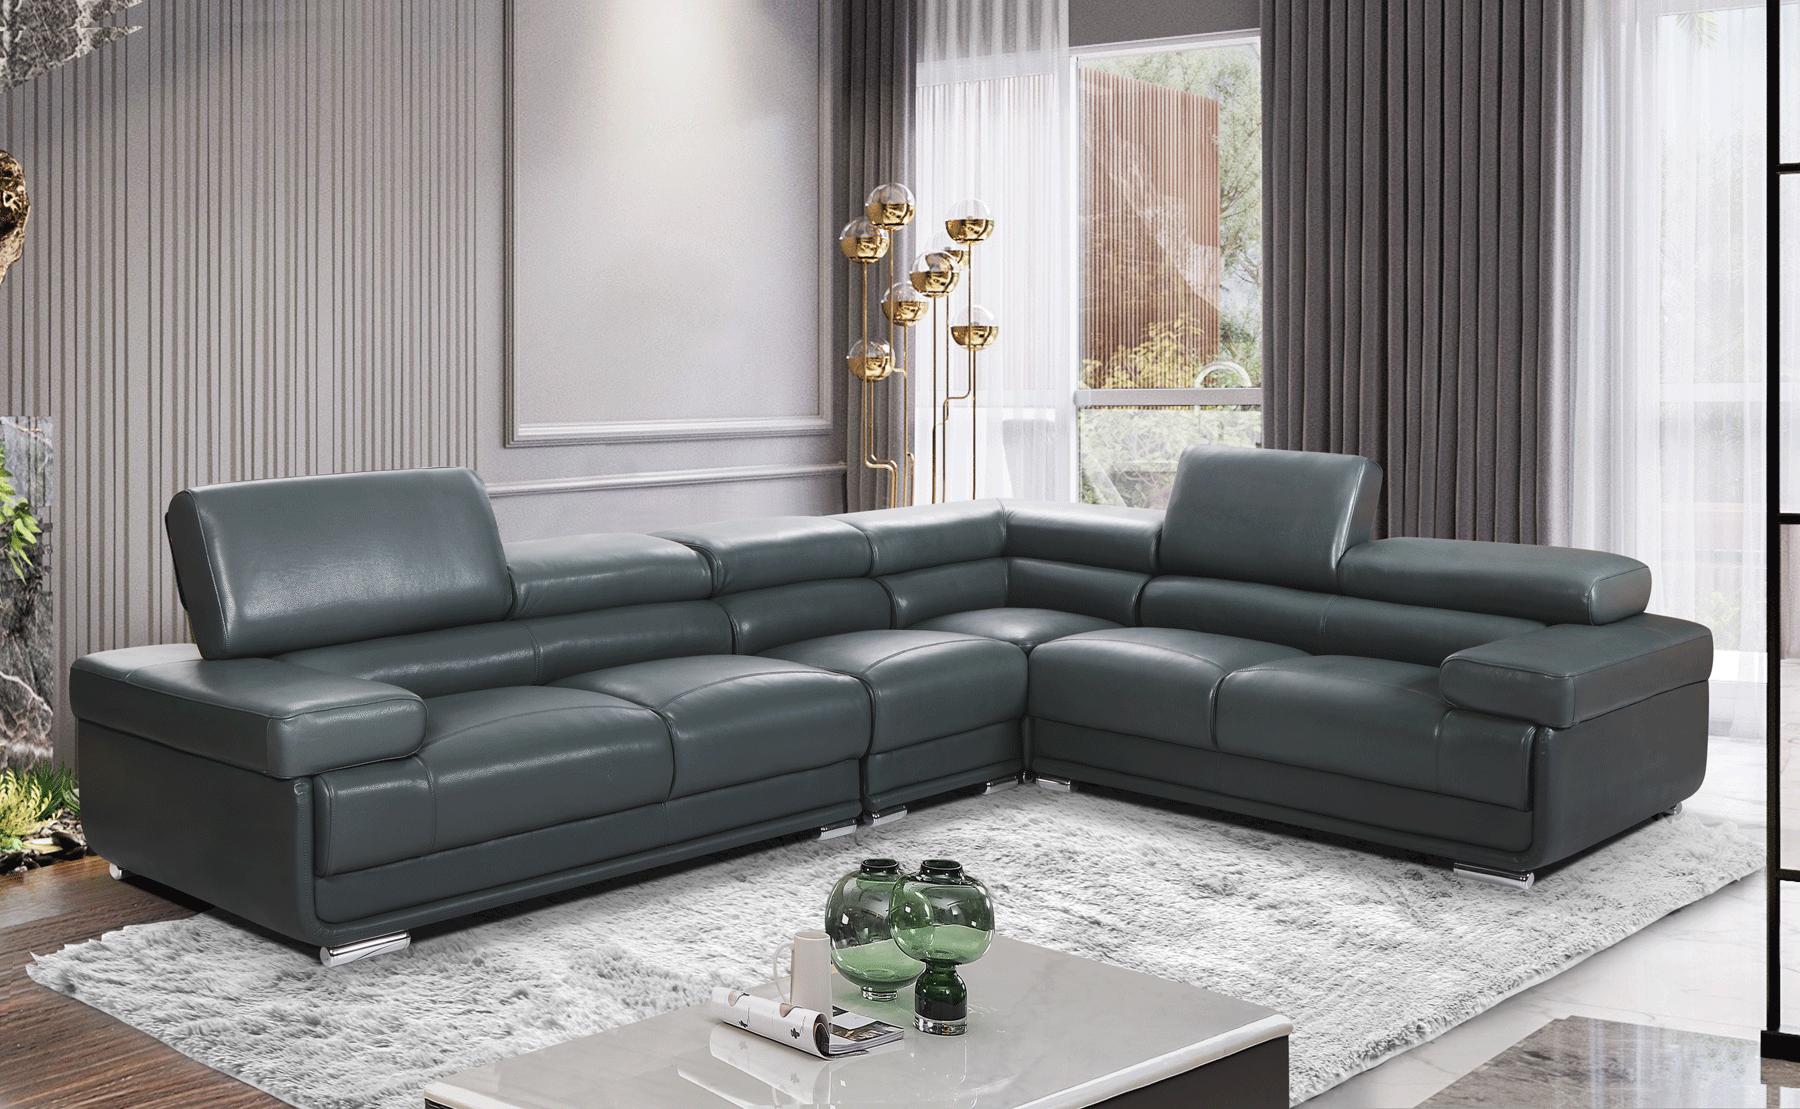   2119 Sectional  